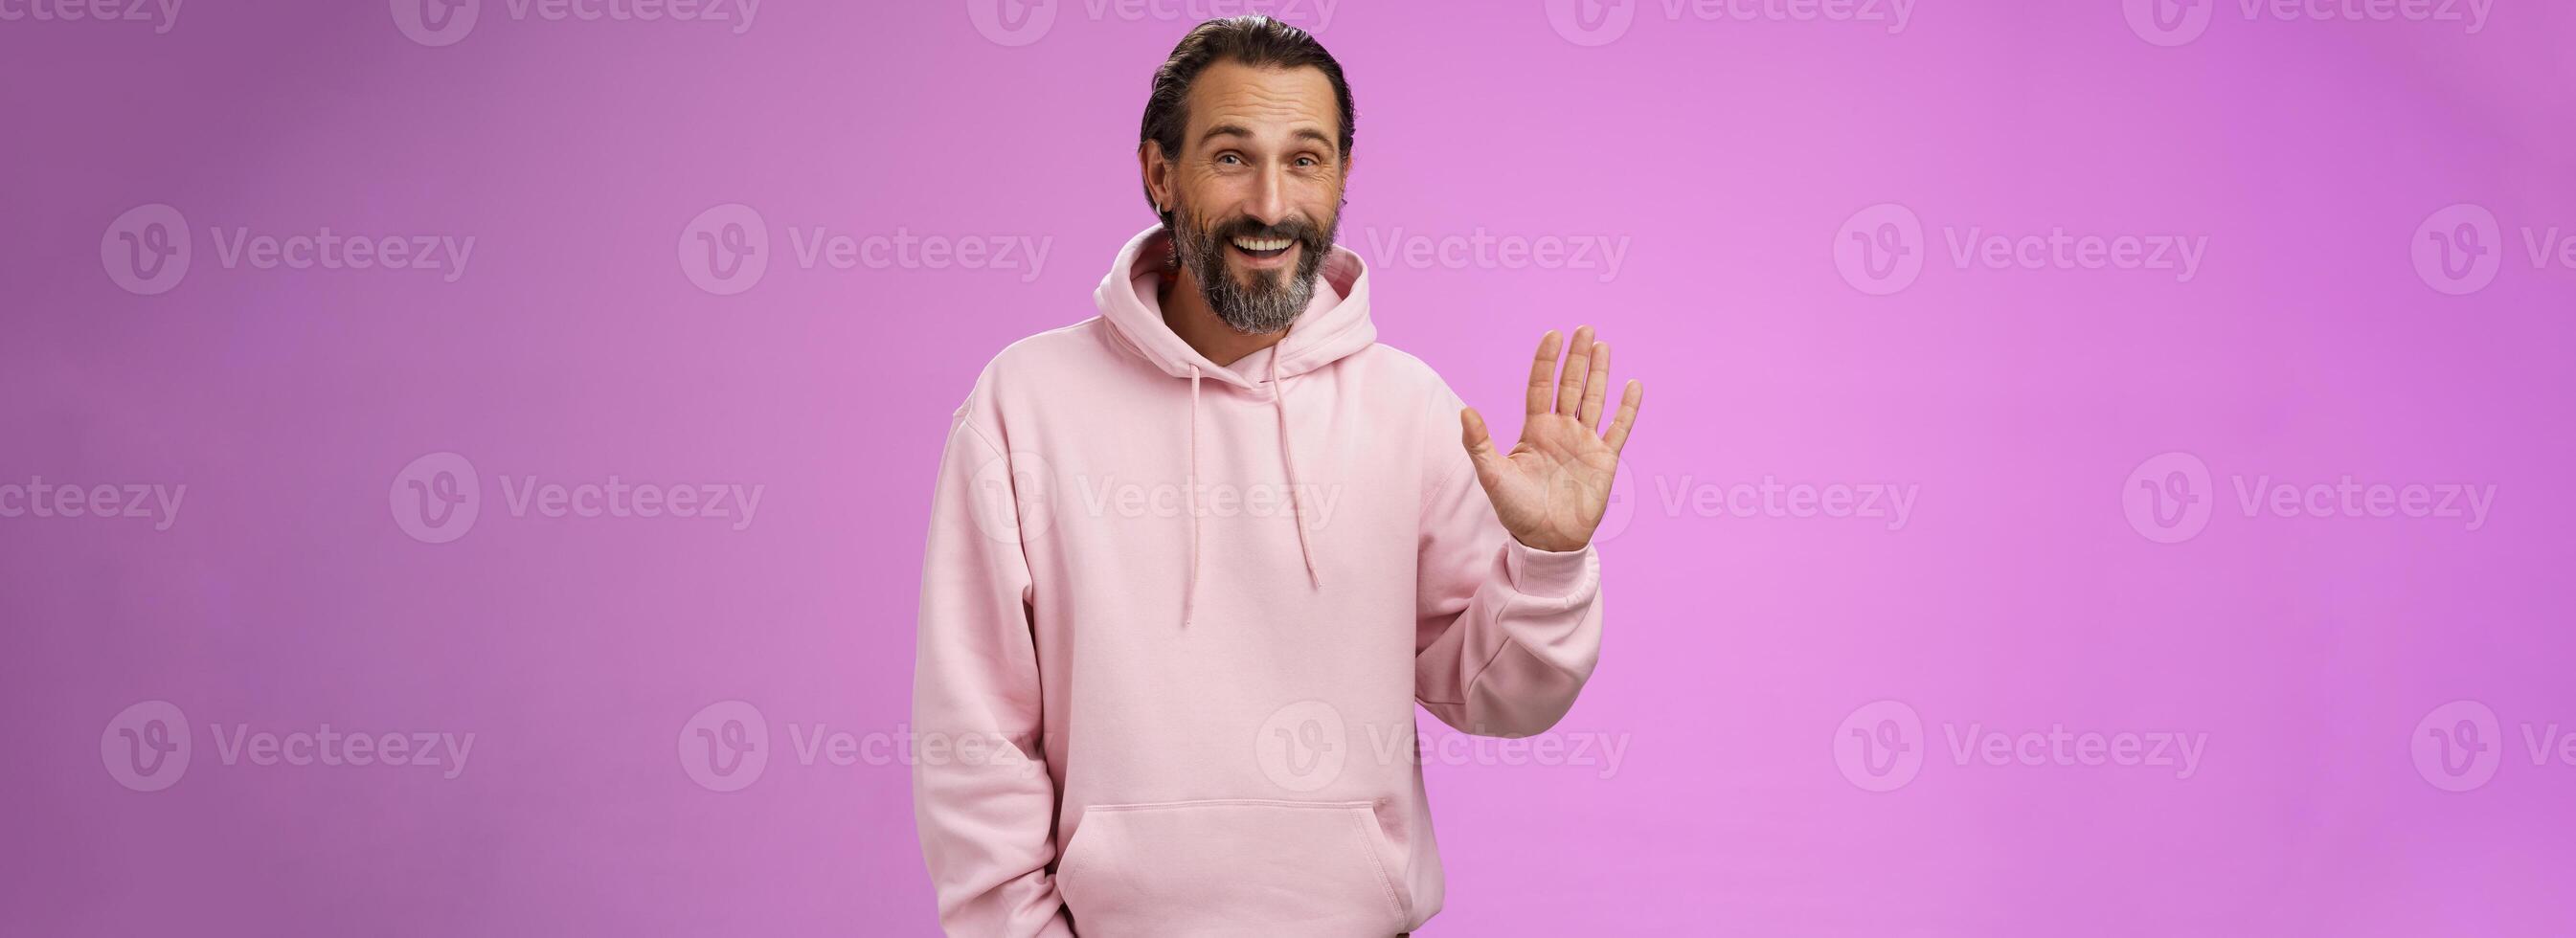 Cheeky charismatic funny happy smiling mature man bearded grey hair in pink hoodie waving palm hello nice meet you greetng gesture welcoming guests say hi standing purple background friendly relaxed photo